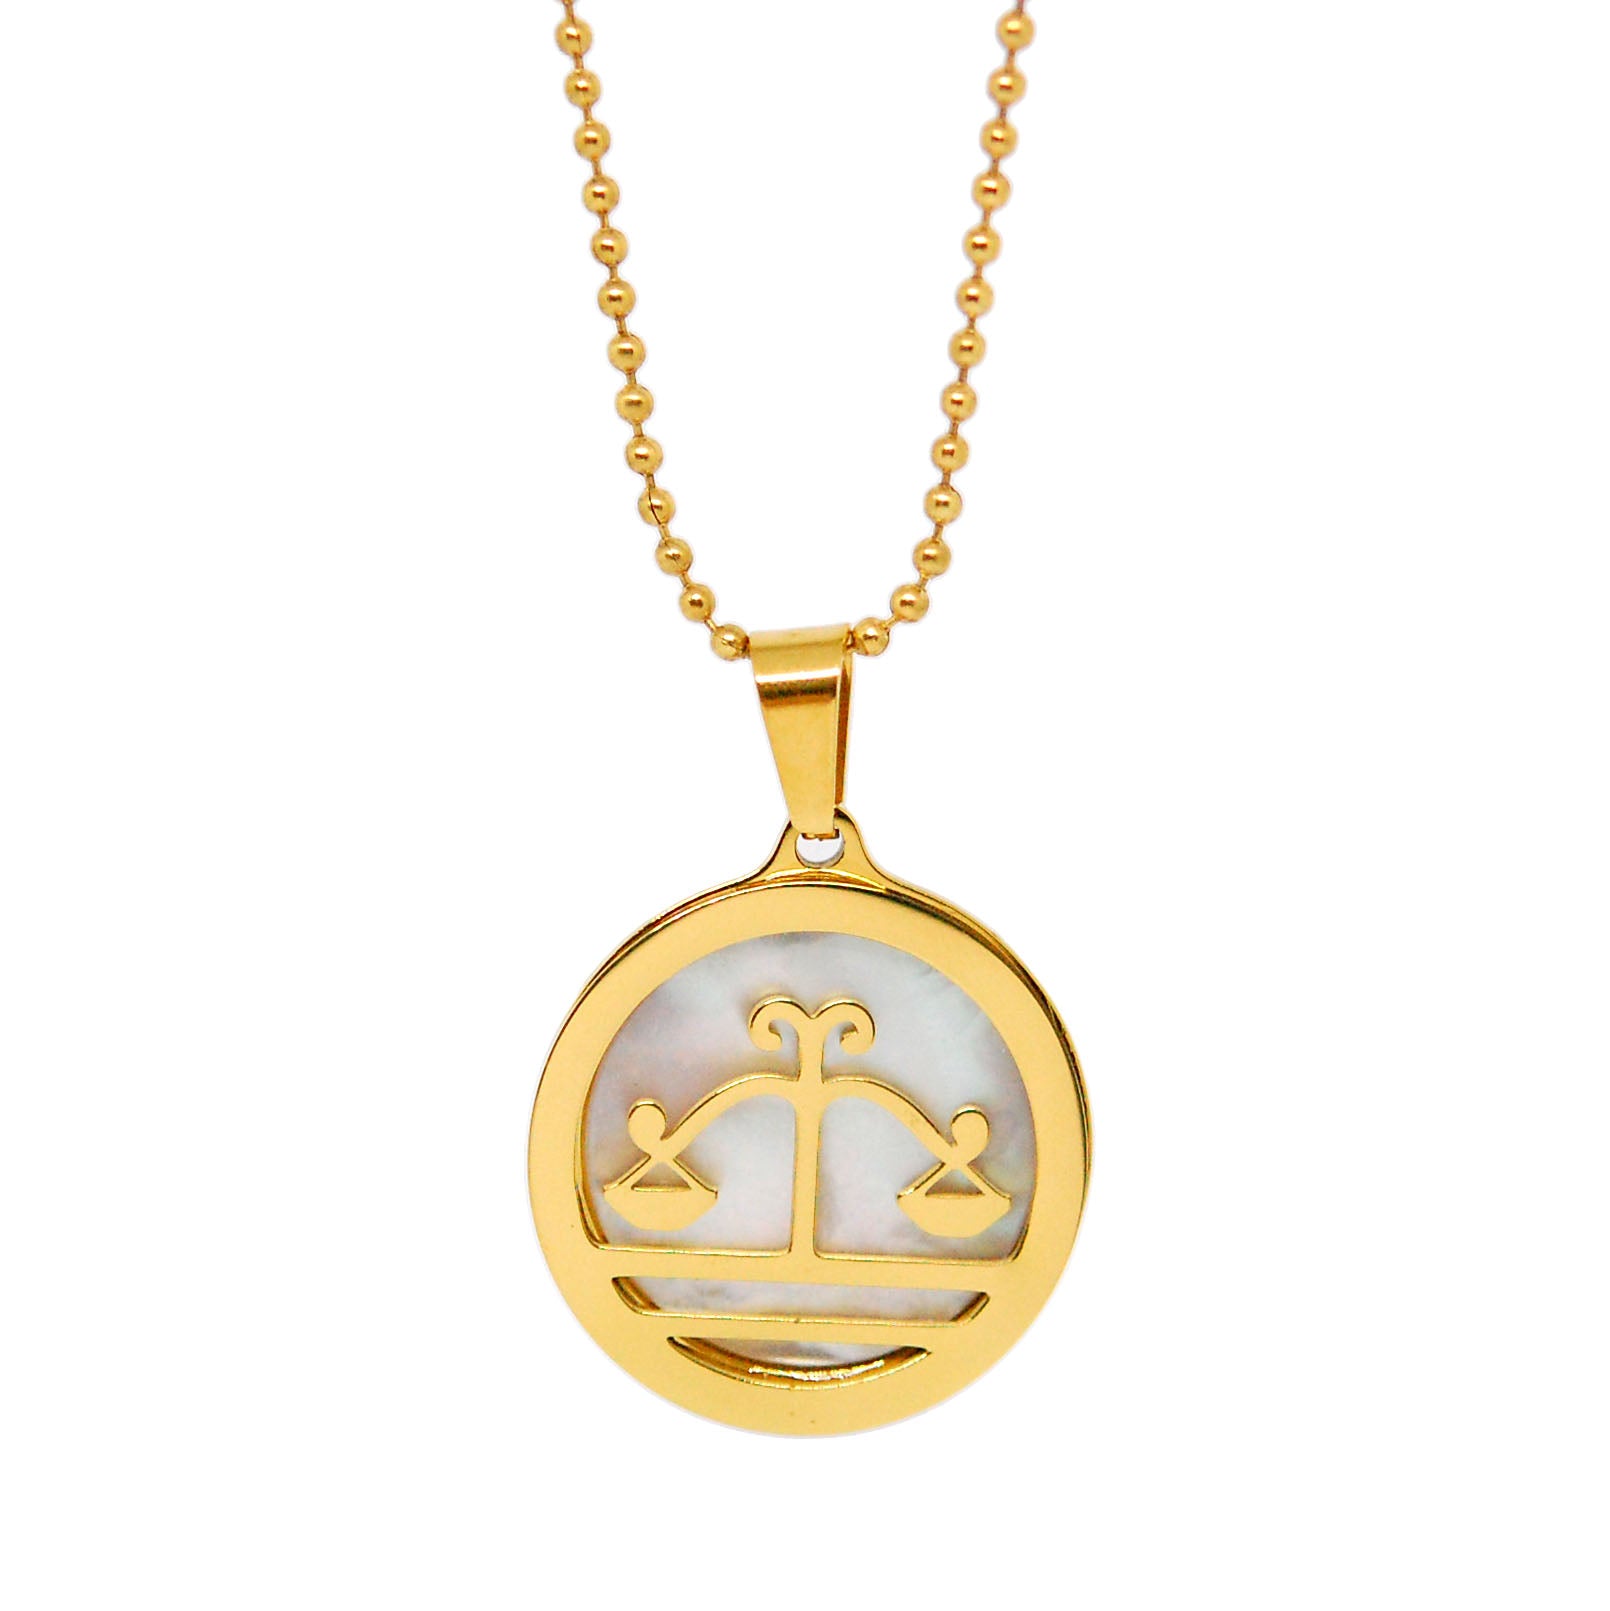 ESN 7973: All IPG Mop Libra Zodiac Necklace w/ 18" IPG Ball Chain